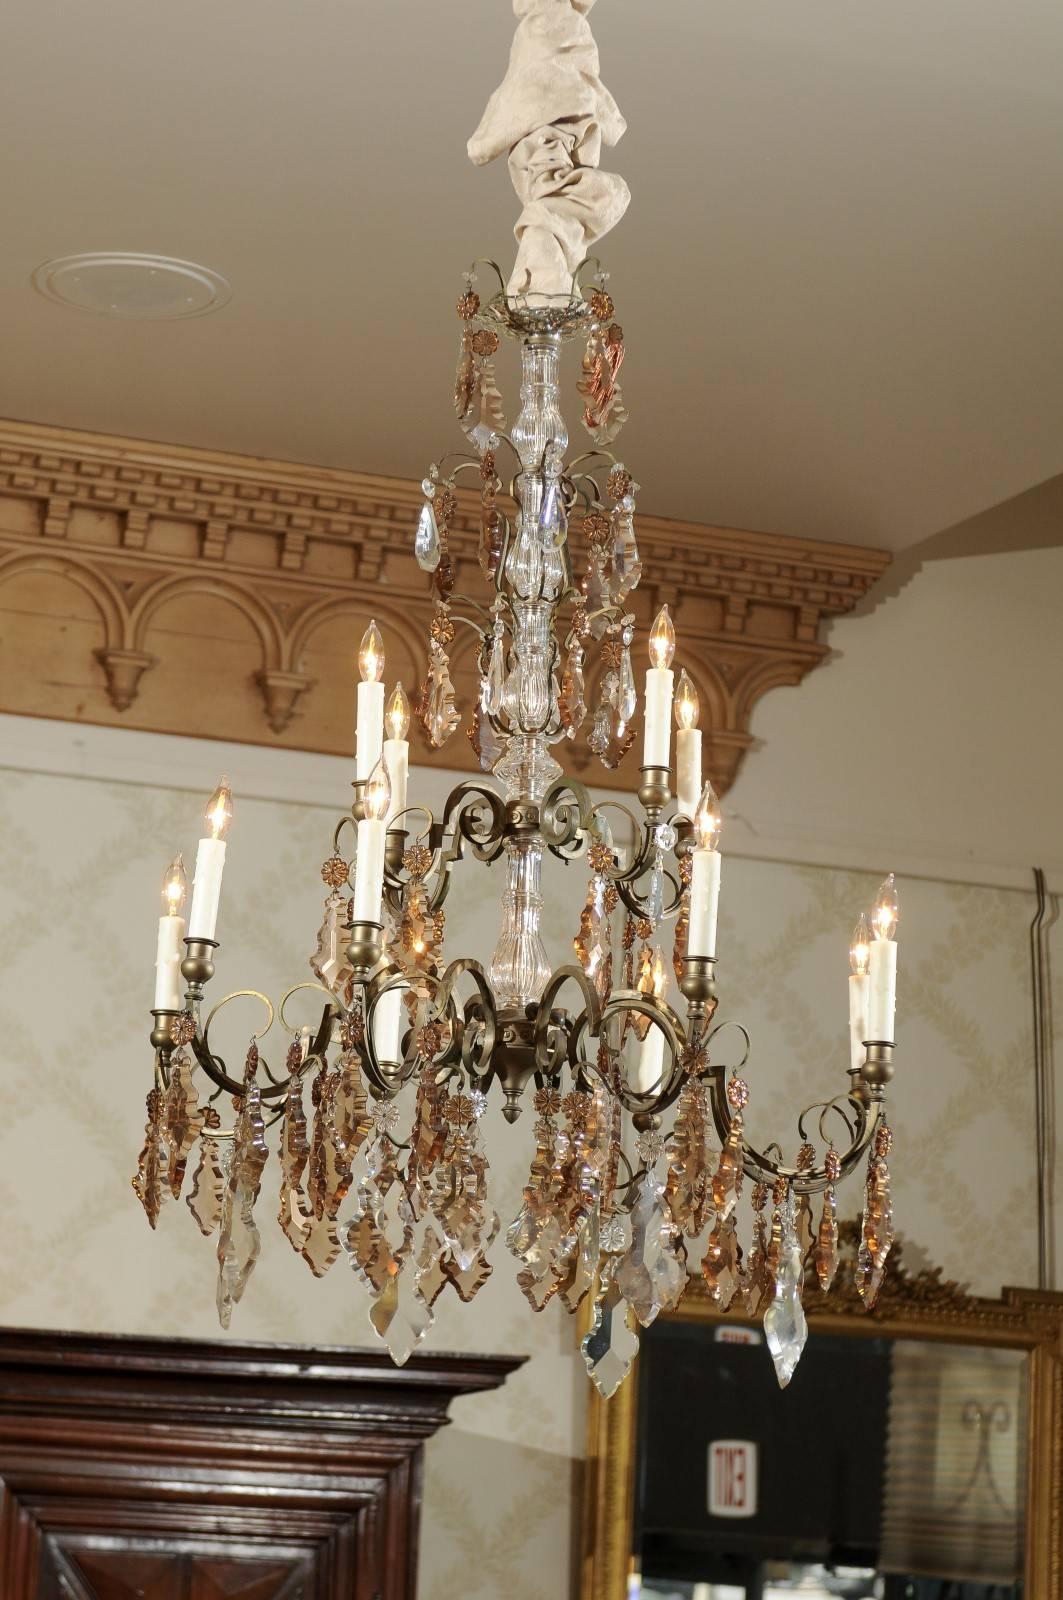 Vintage French bronze and crystal chandelier with 12 arms, circa 1940.
The design of this chandelier consists of five tiers with just crystals on the top three tiers and the 12 lights carry the bottom two tiers. The crystals are alternating colors